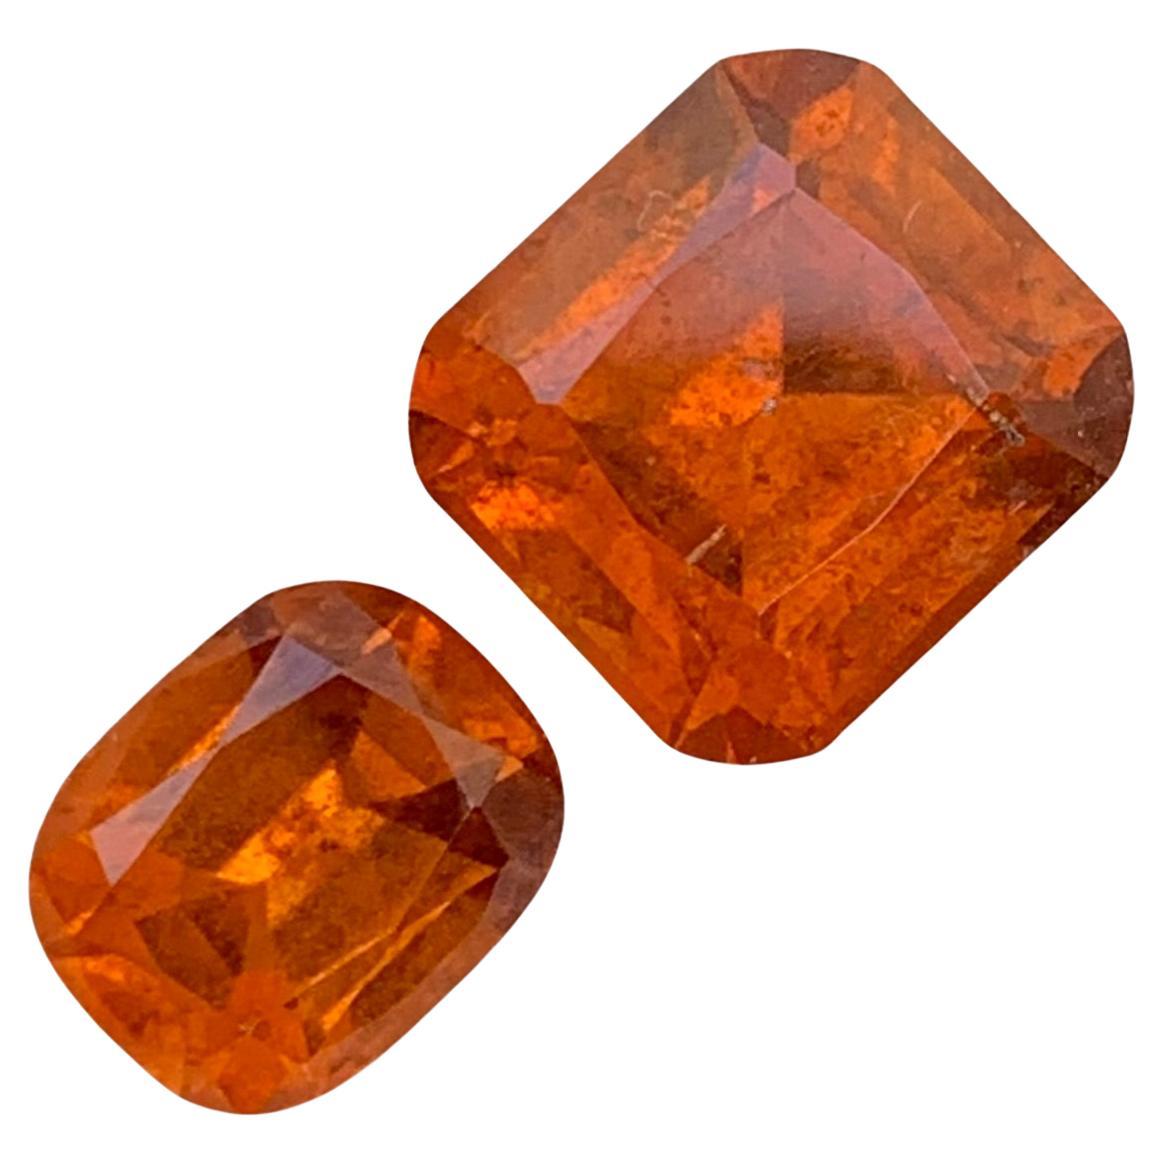 5.95 Carats Natural Loose Hessonite Garnet 2 Pieces For Ring Jewelry Making  For Sale